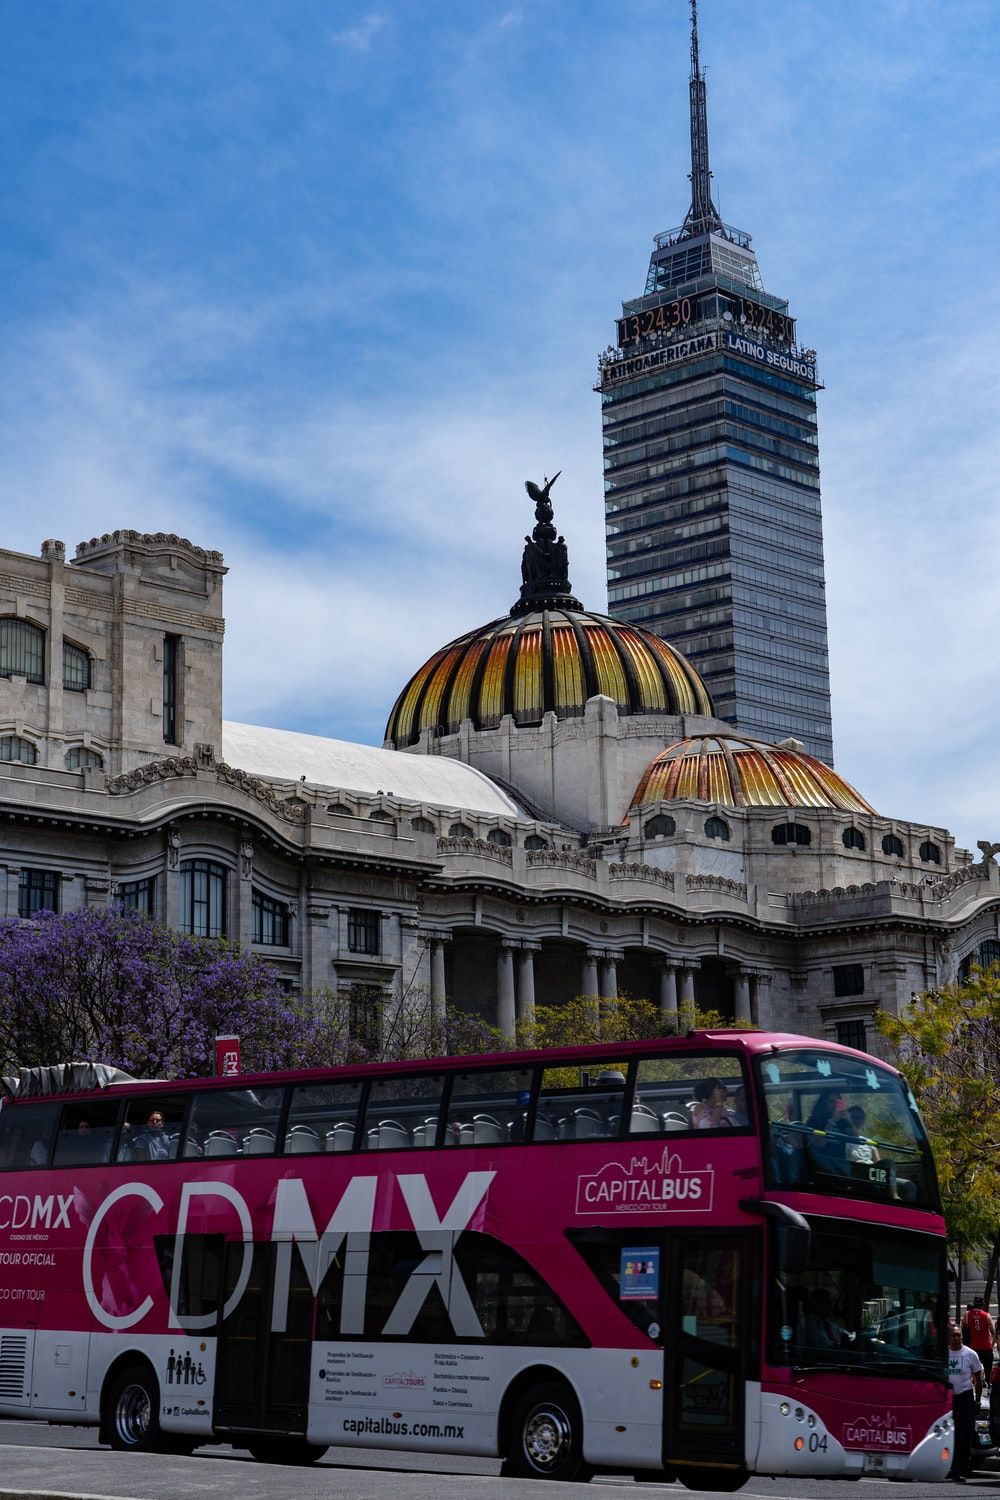 Mexico City Picture. Download Free Image